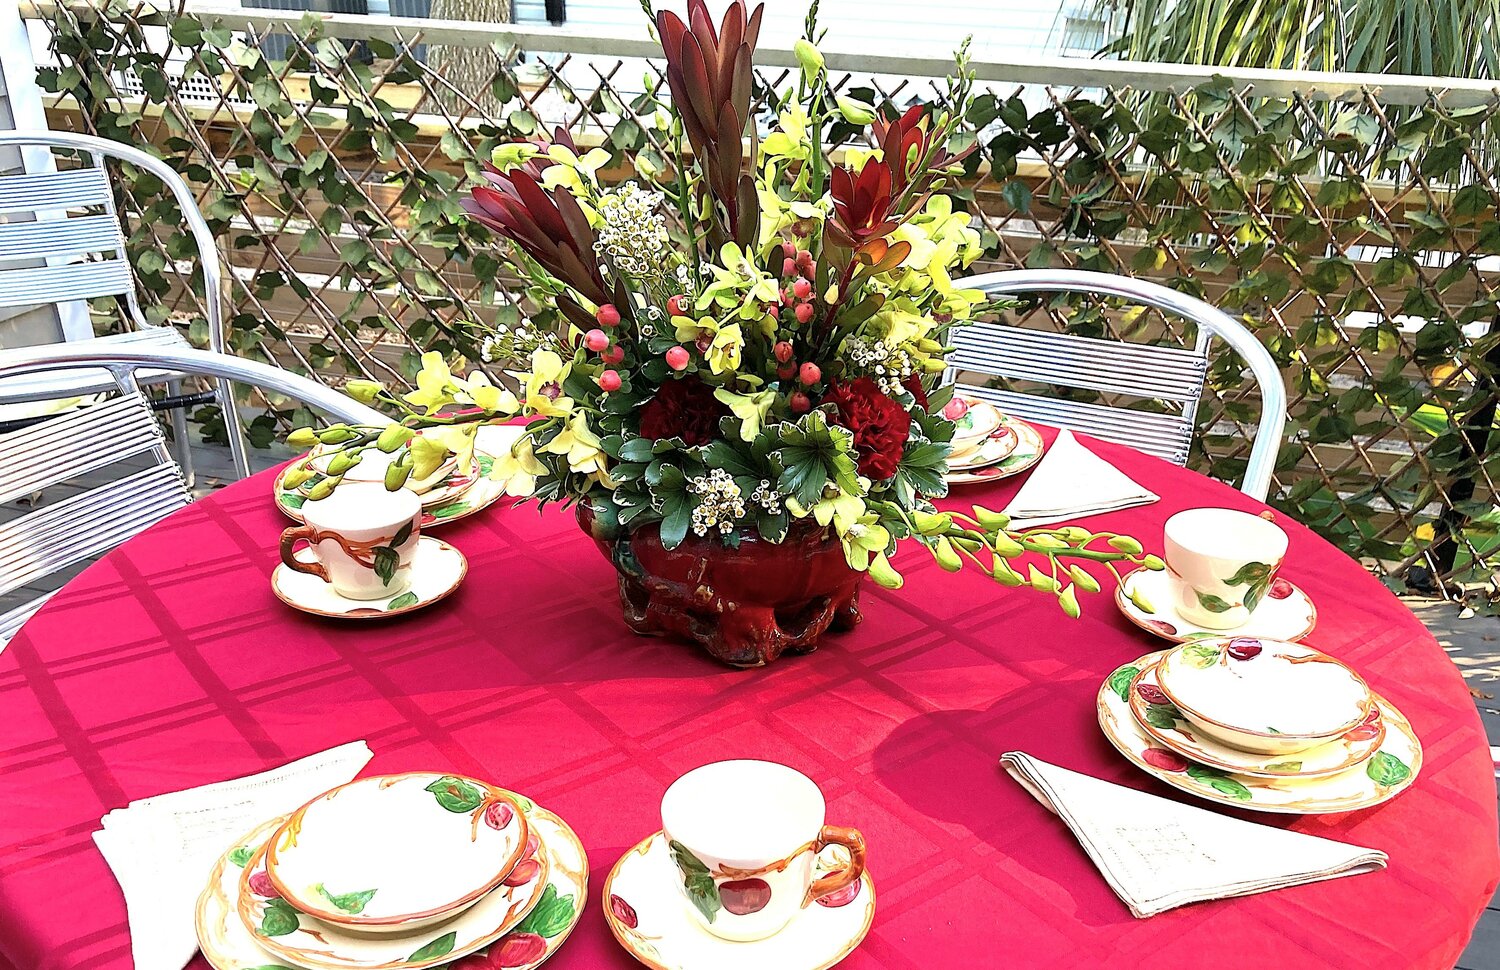 A photo from a past Holiday Tour of Homes event.